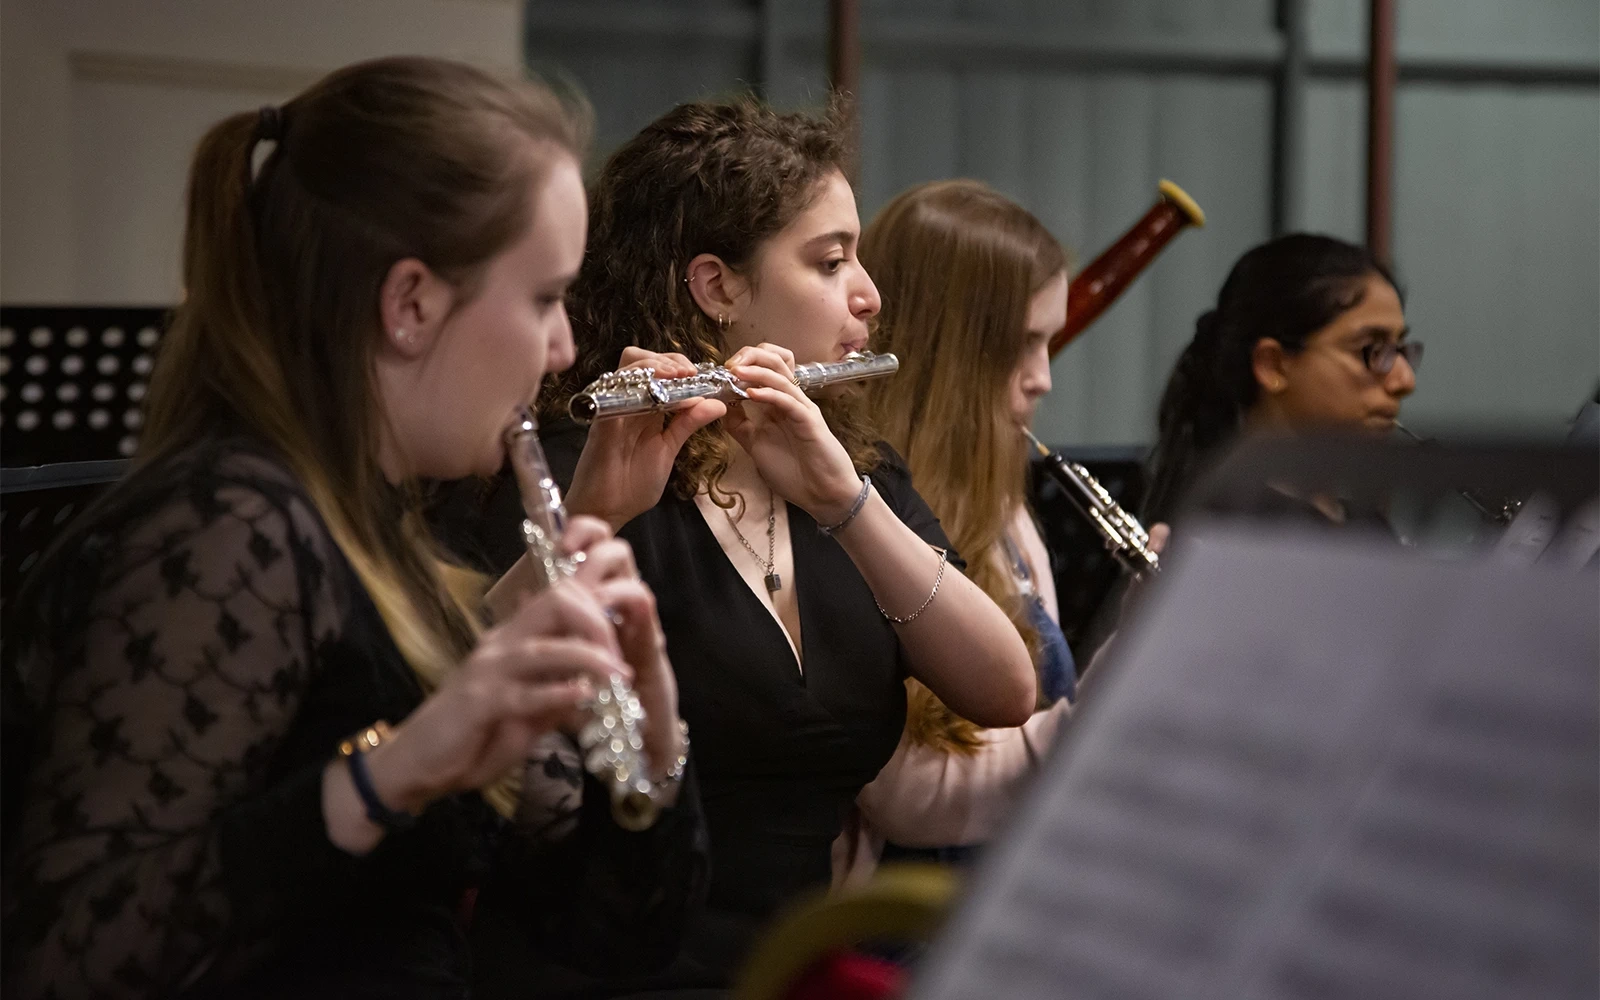 Several young women playing instruments in the woodwind section of the orchestra